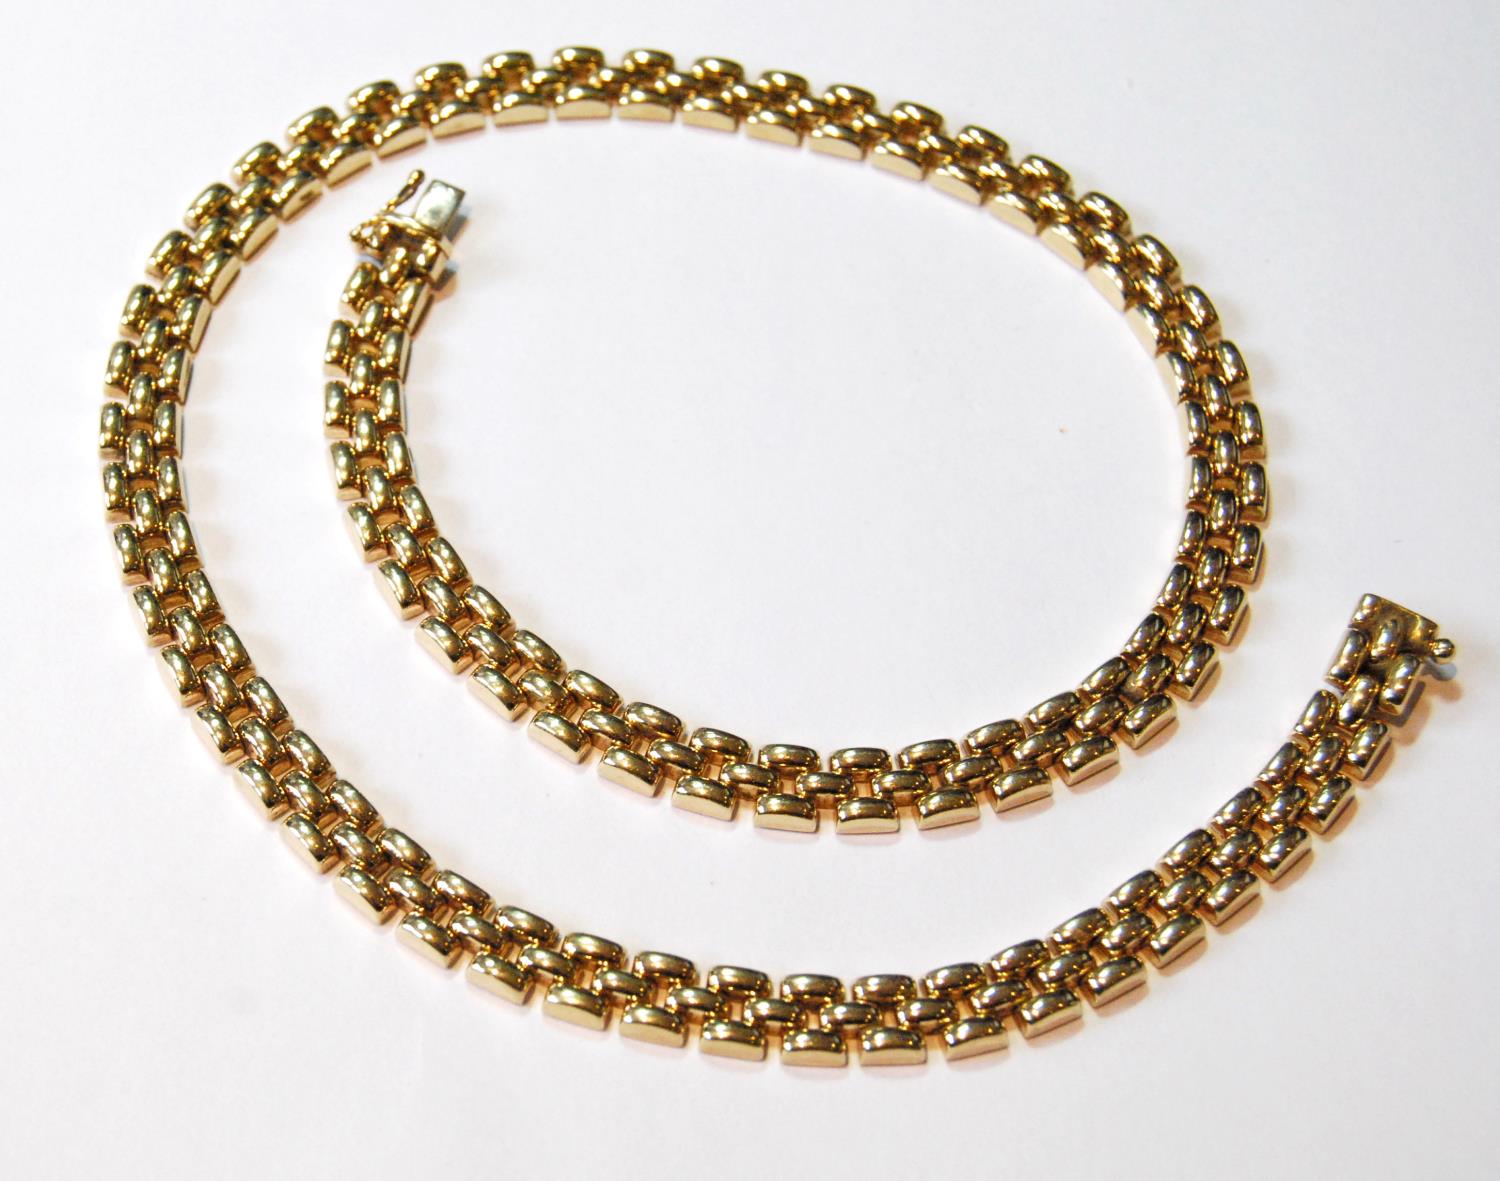 9ct gold necklace of rounded brick pattern, 32g.